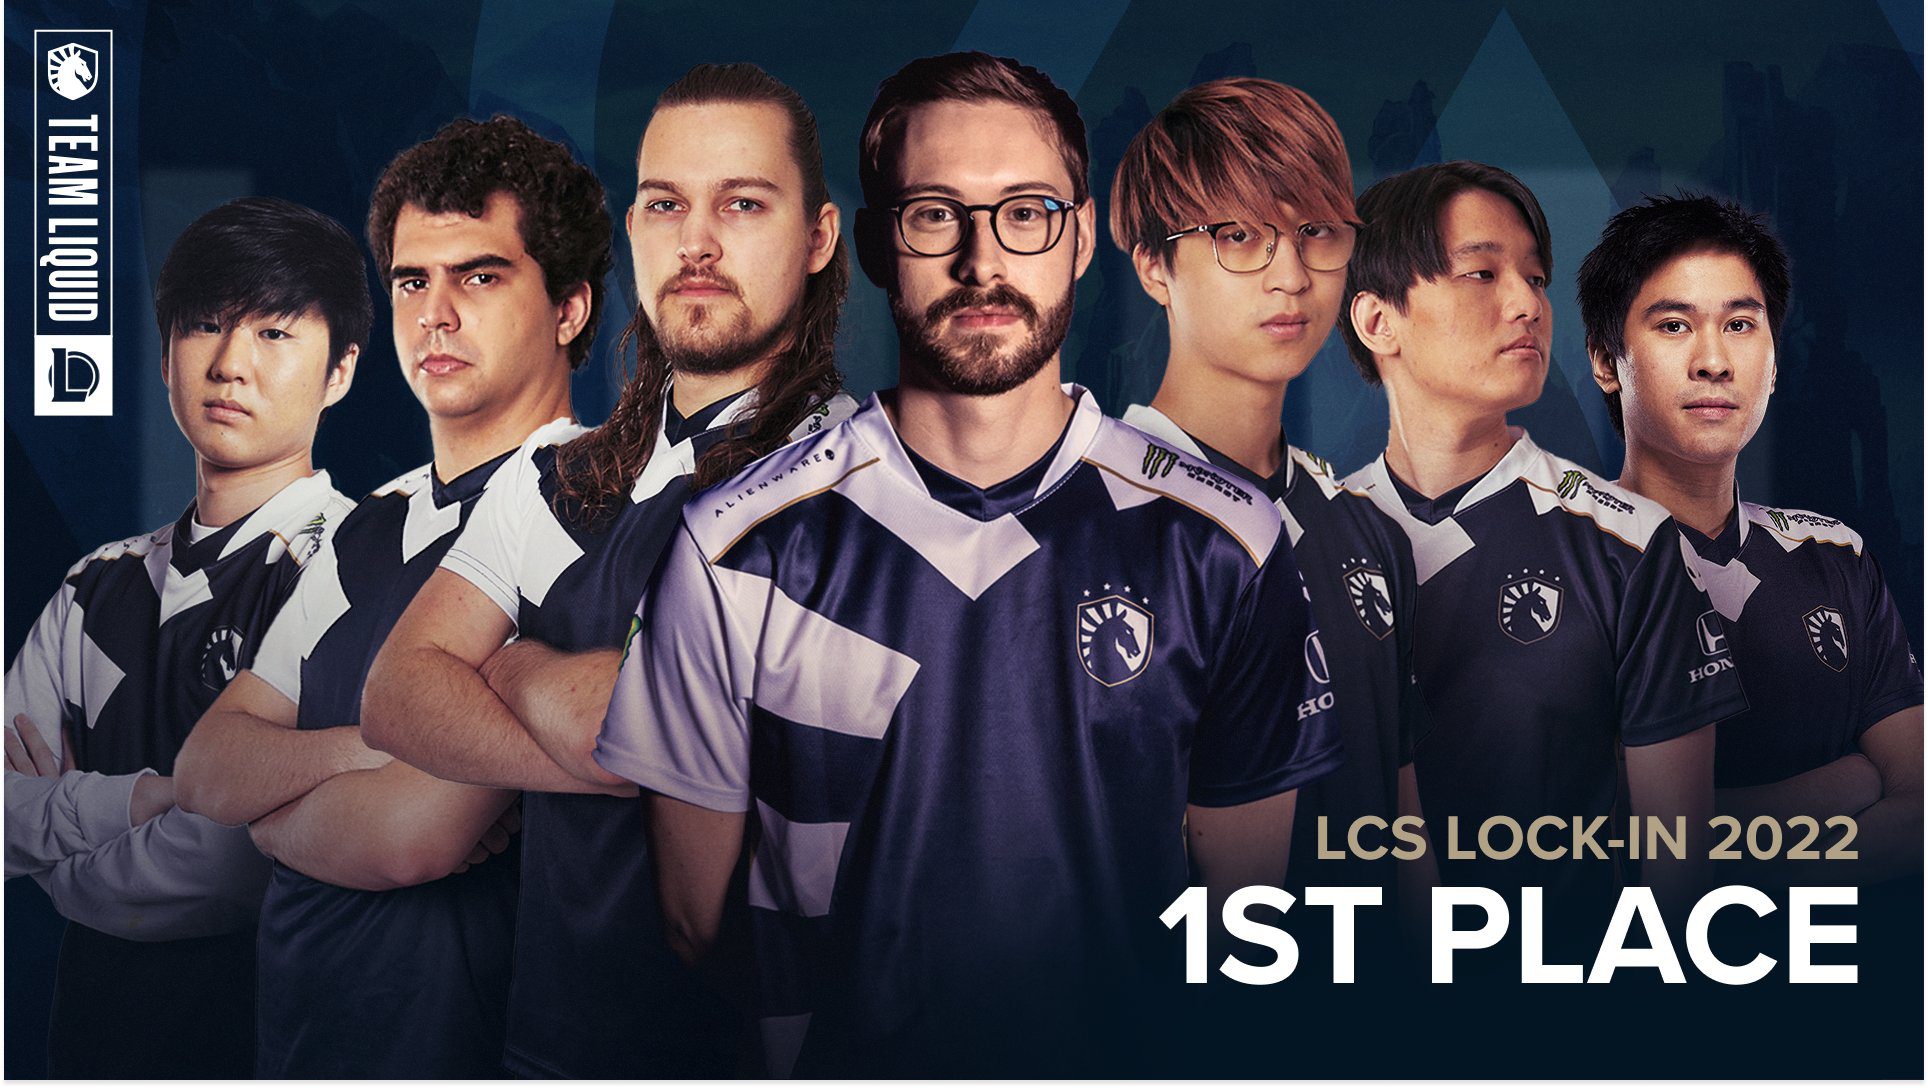 All the members of Team Liquid in the Lock In